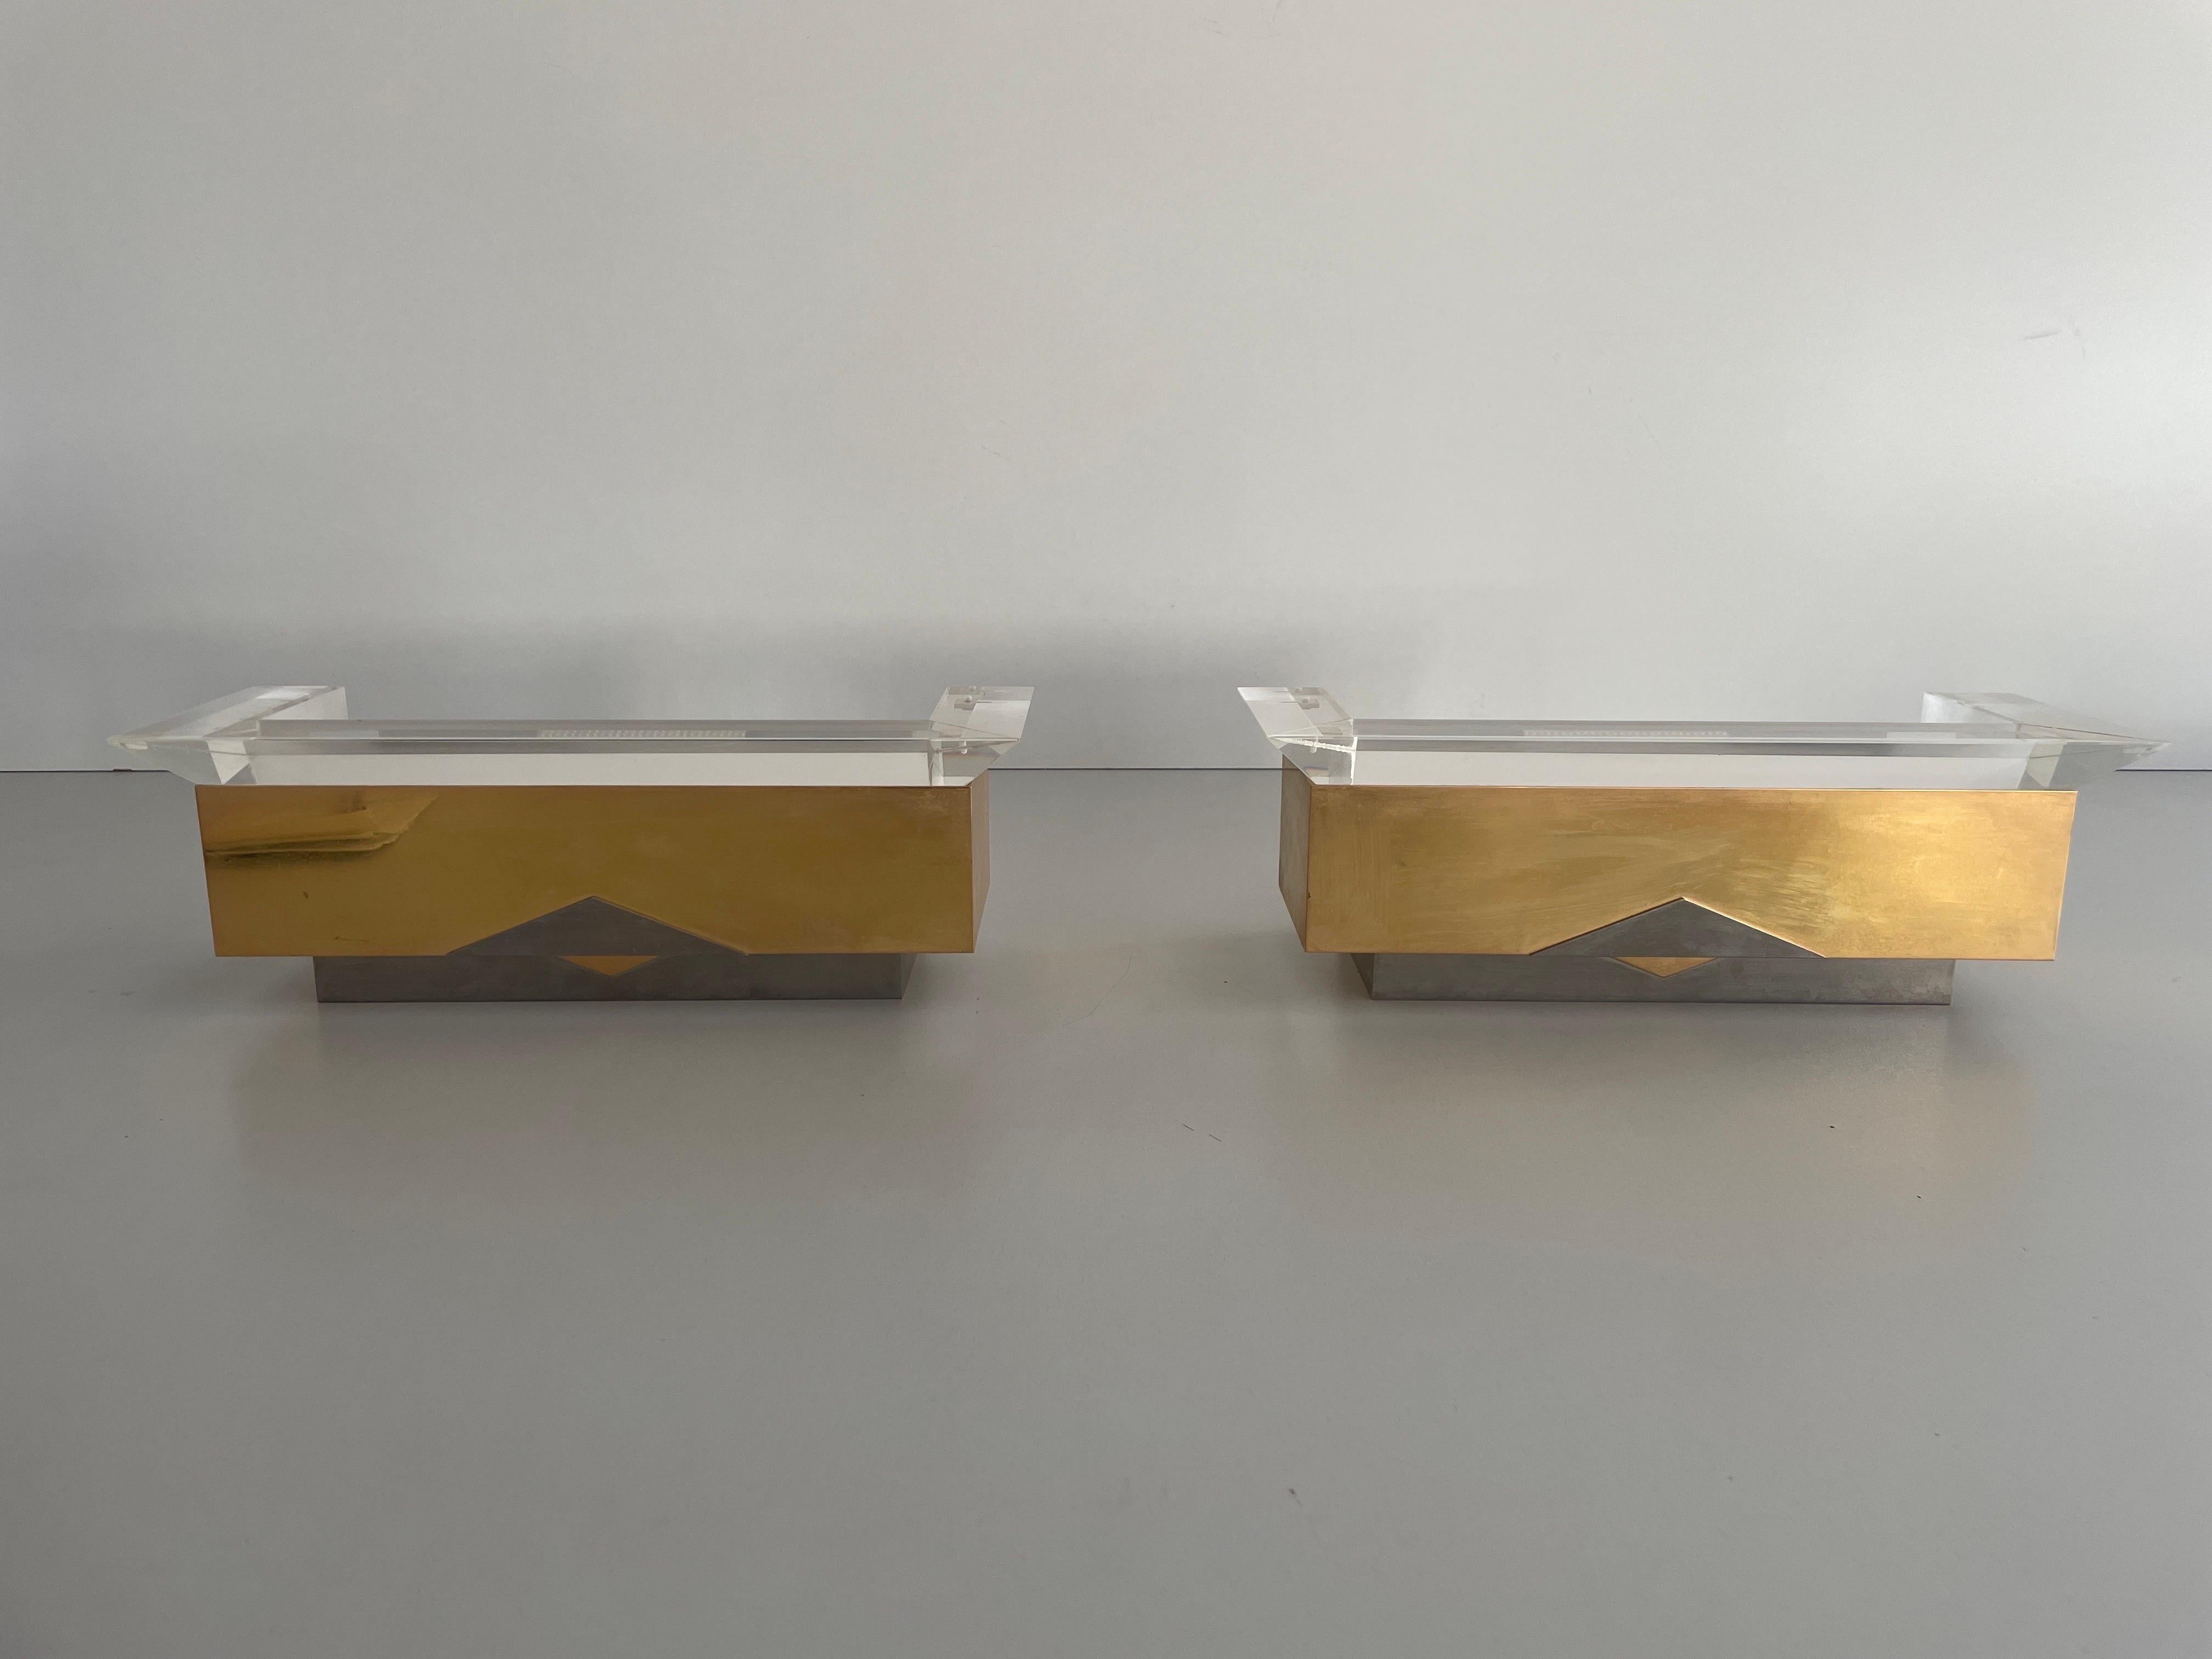 Gold Metal Lucite Halogen Sconces by Vereinigte Werkstätten, 1970s, Germany

Lamps are in very good condition.

These lamps works with Halogen light bulbs. 
Wired and suitable to use in all countries. (110-220 V)

Dimensions:
Height: 12 cm
Width: 34